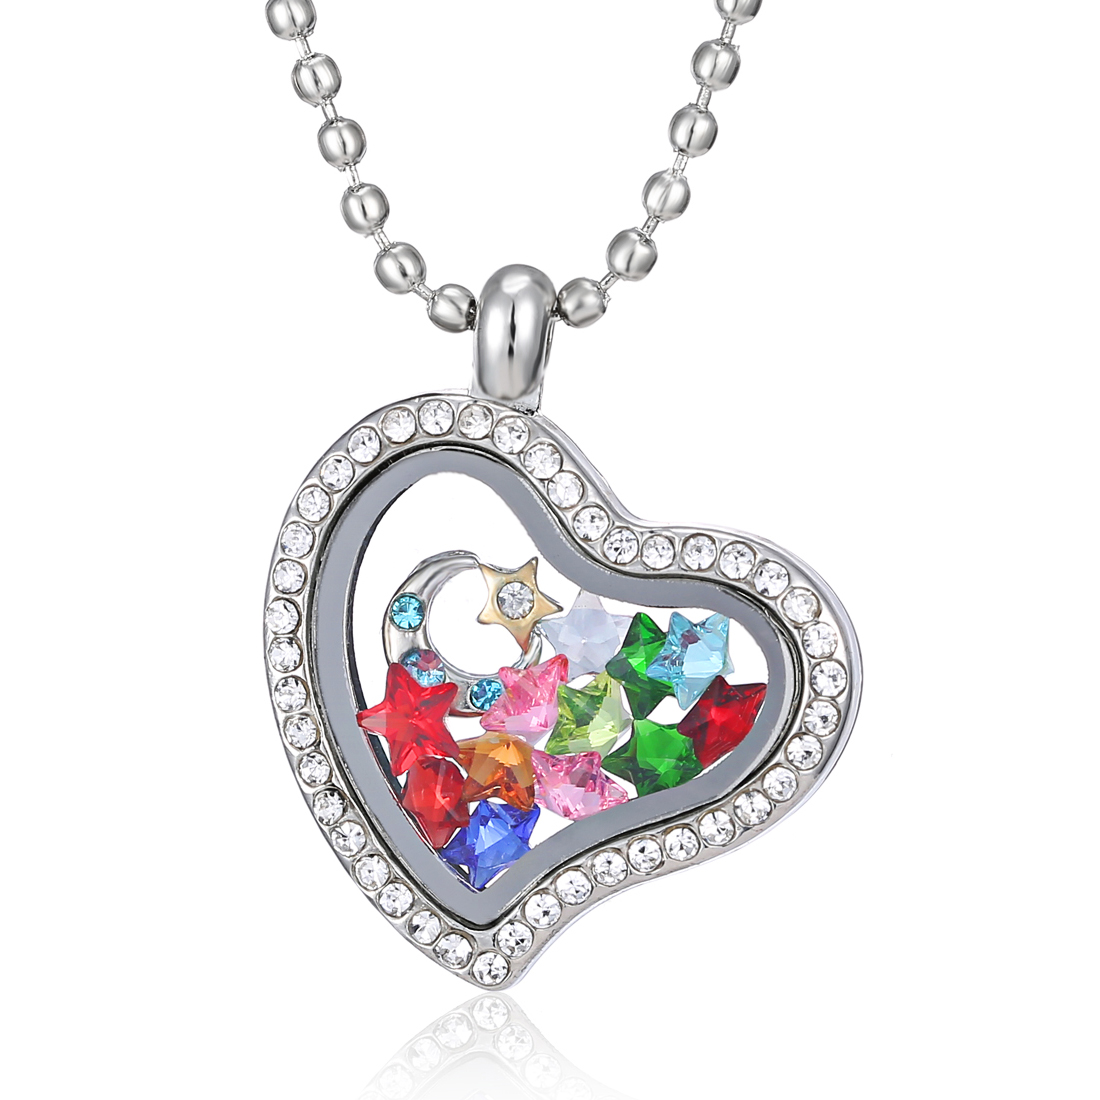 Chic Living Memory Floating Glass Love Locket Charms Necklace Pendant ...